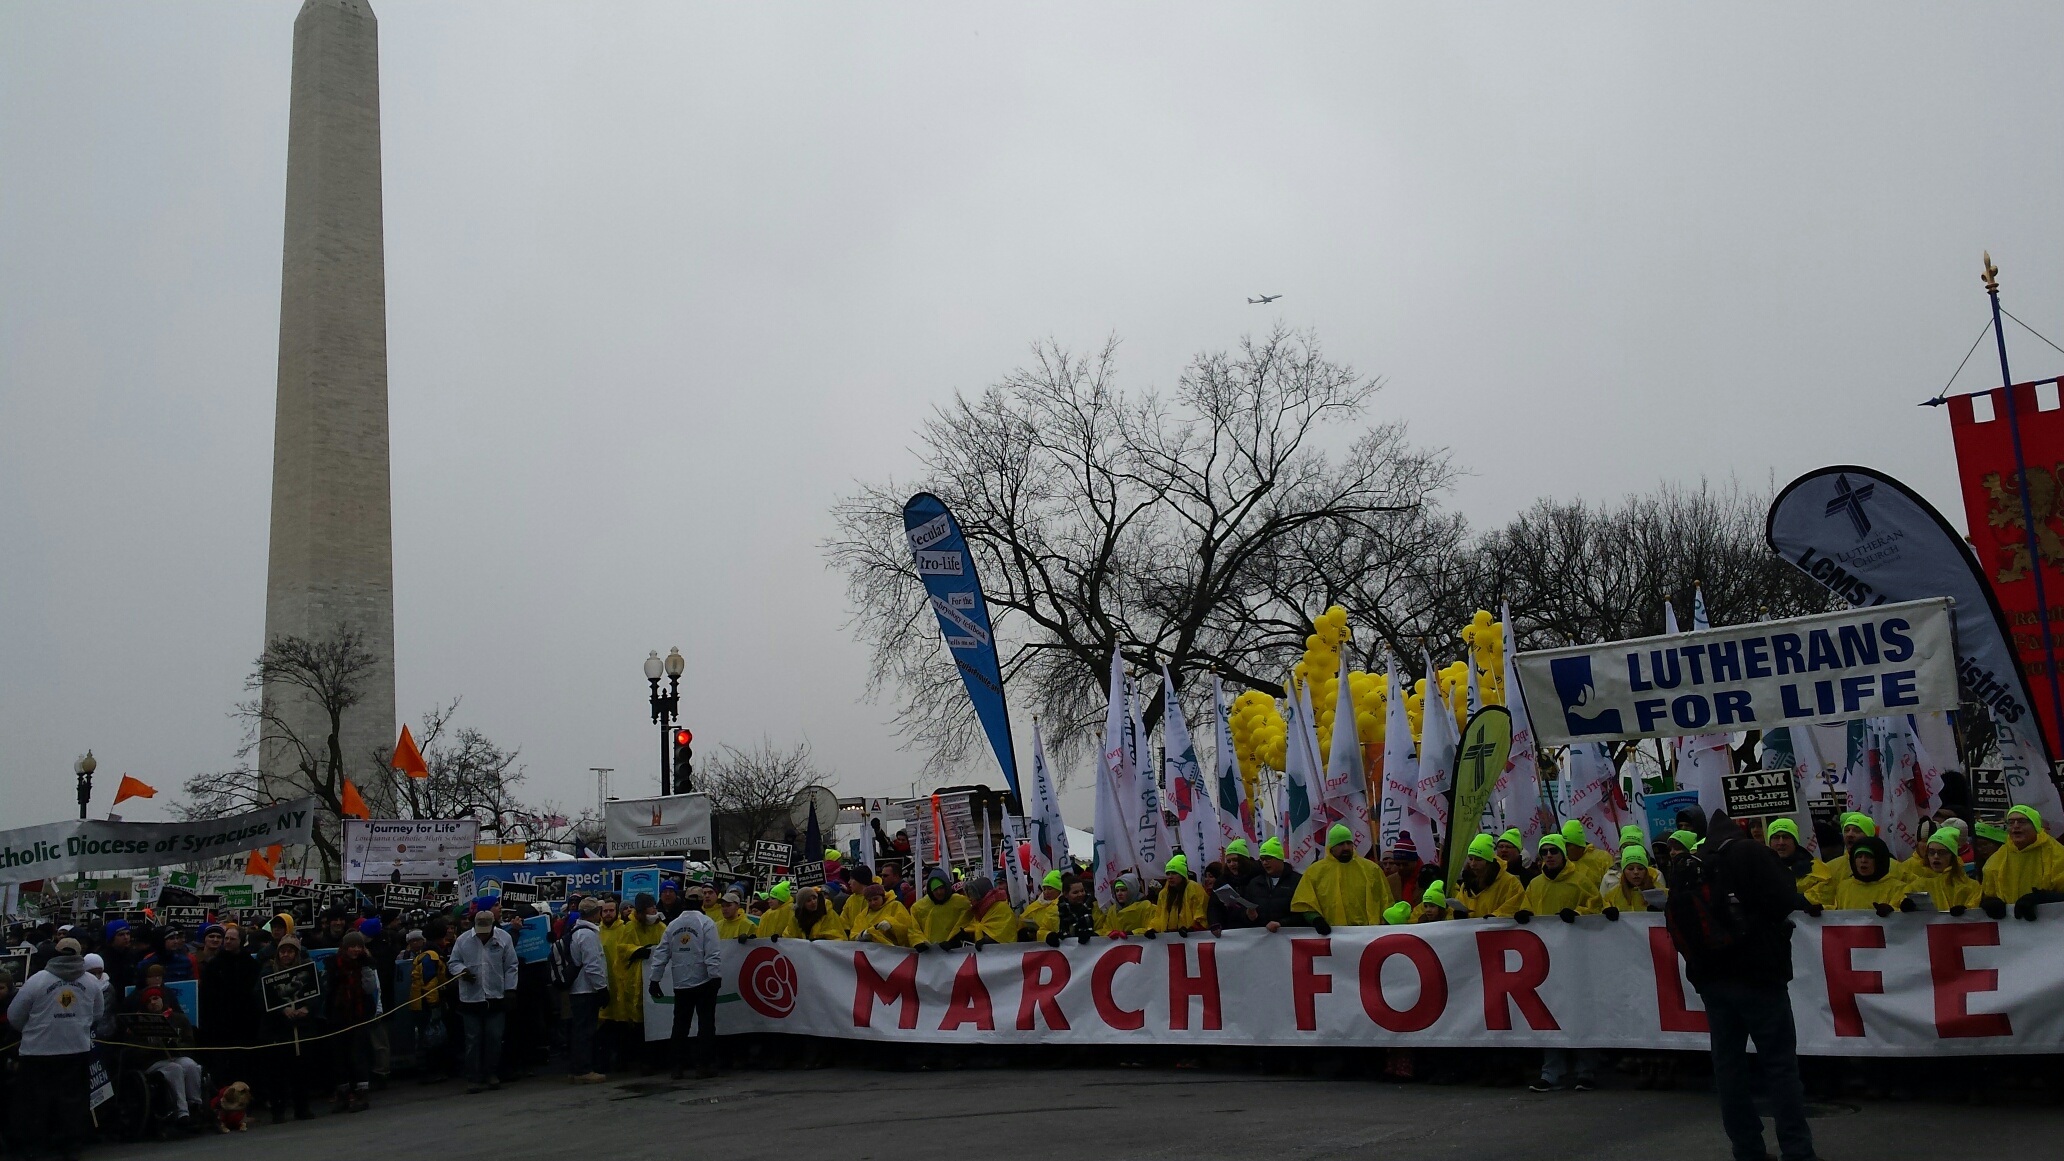 March for Life: With Every Woman, for Every Child